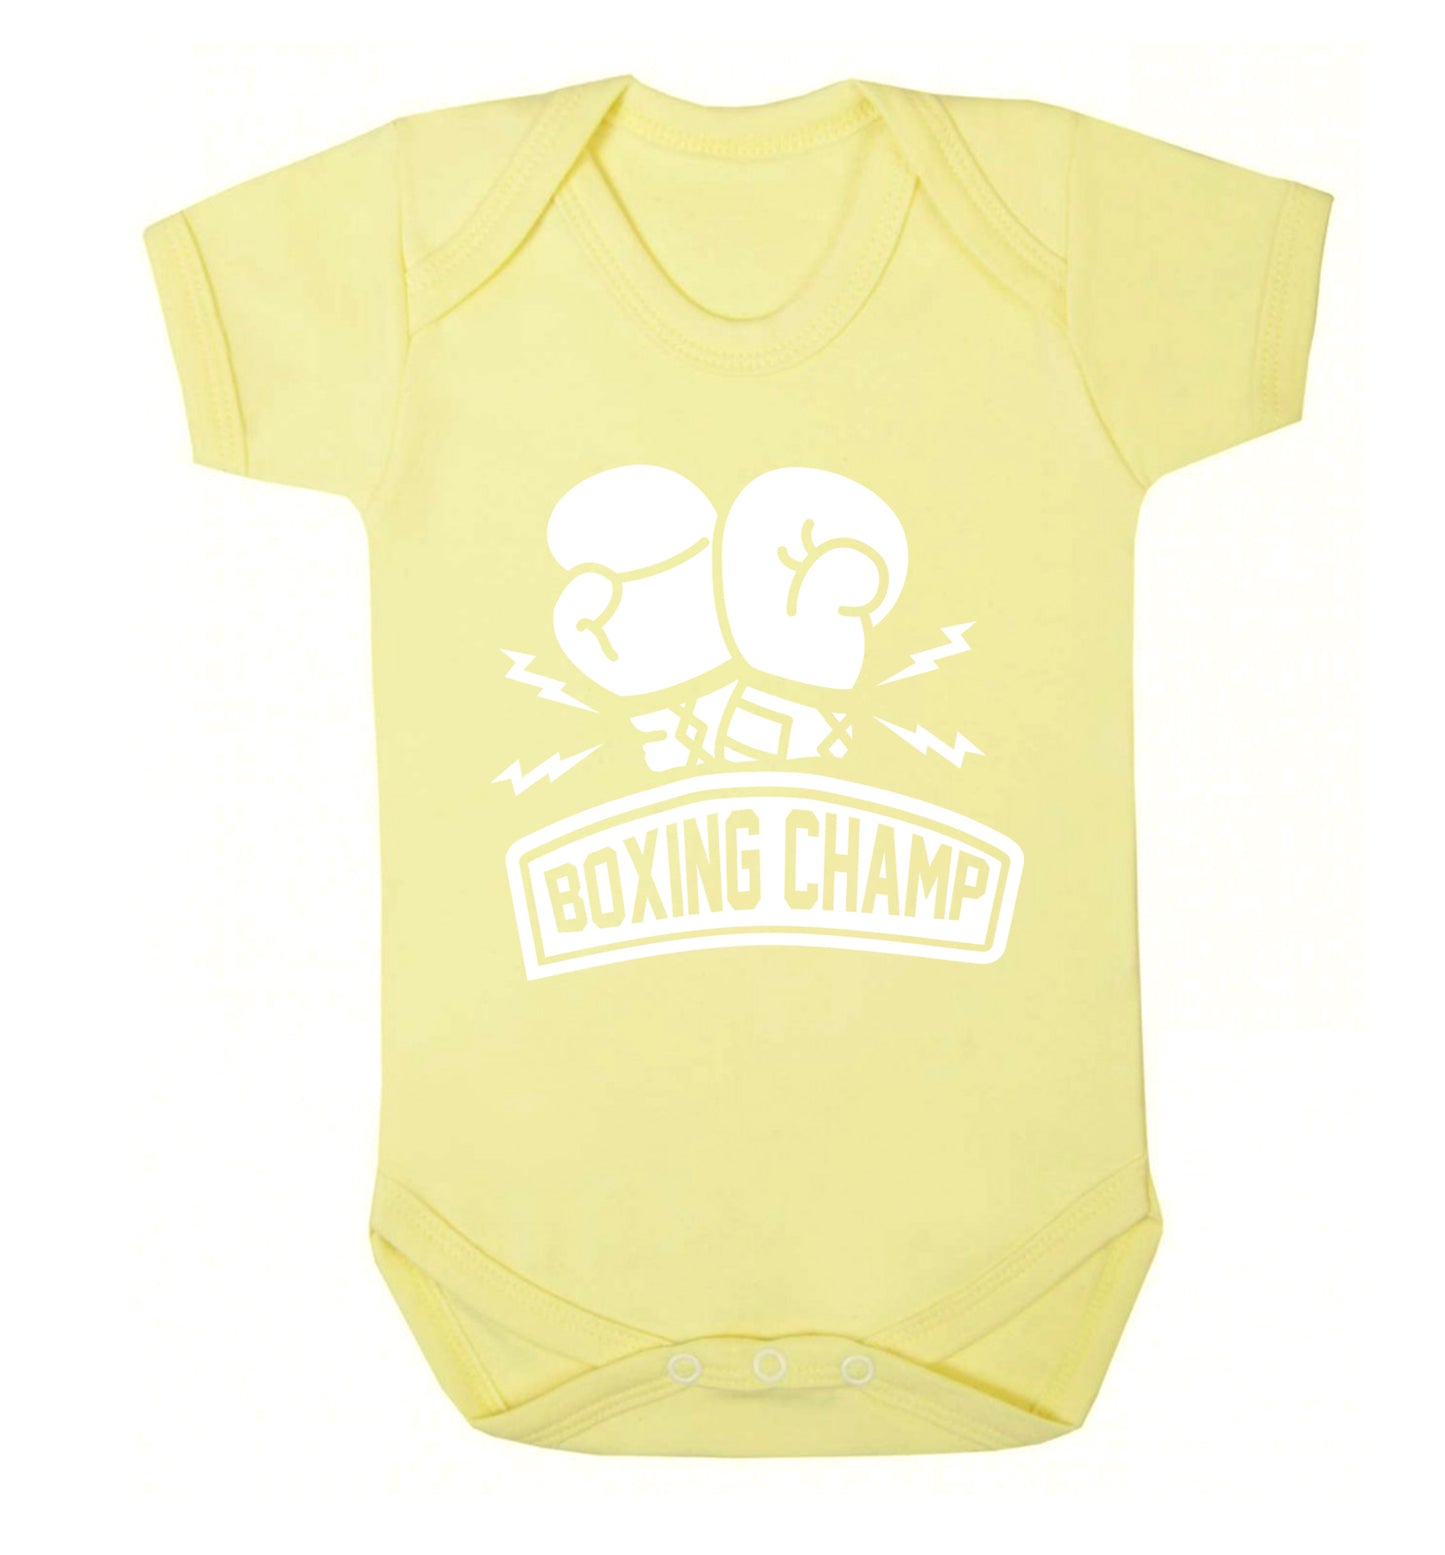 Boxing Champ Baby Vest pale yellow 18-24 months